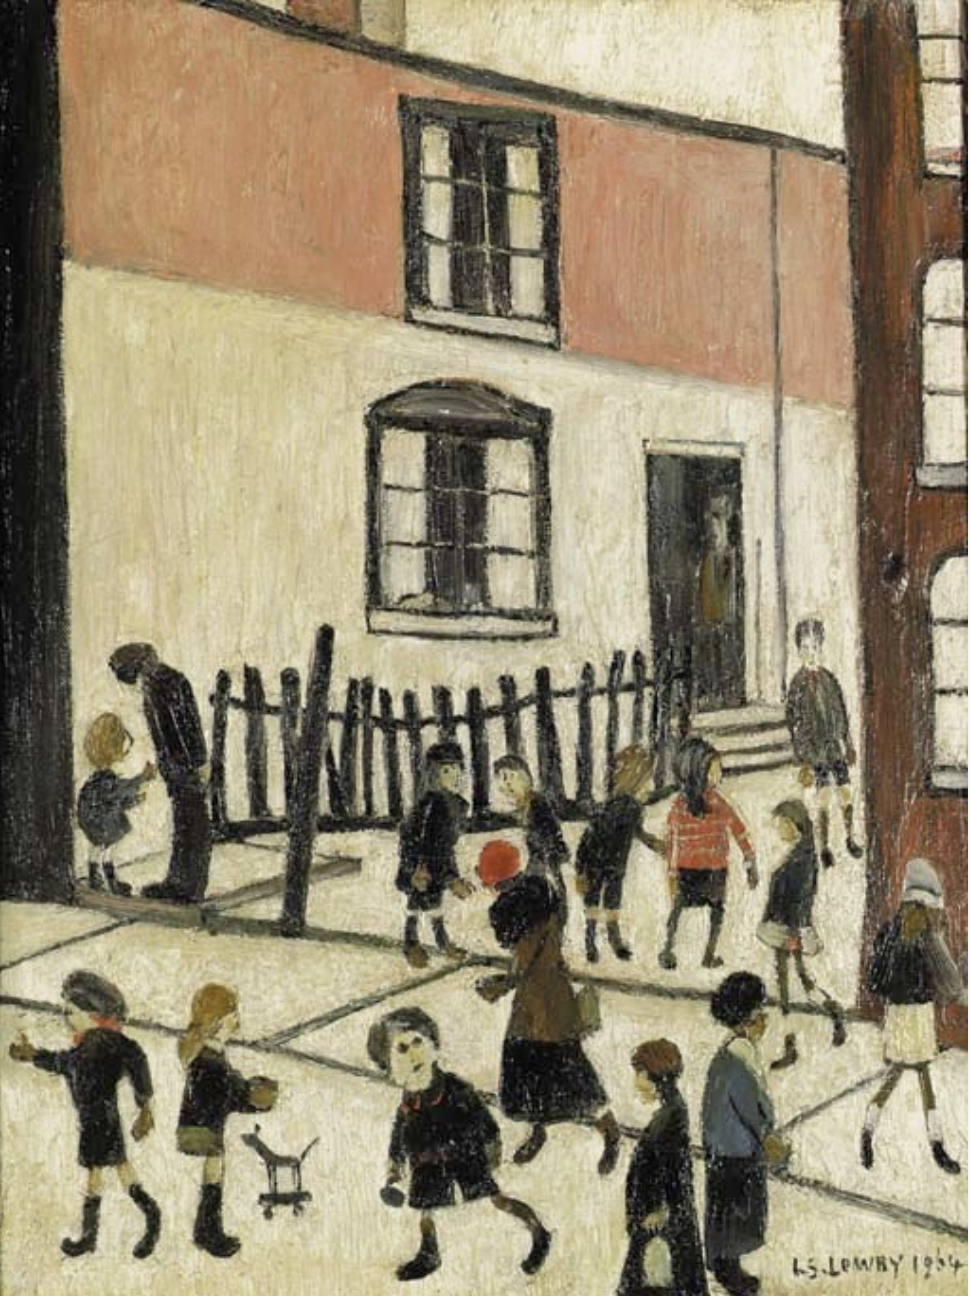 A court, Manchester (1962) by Laurence Stephen Lowry (1887 - 1976), English artist.